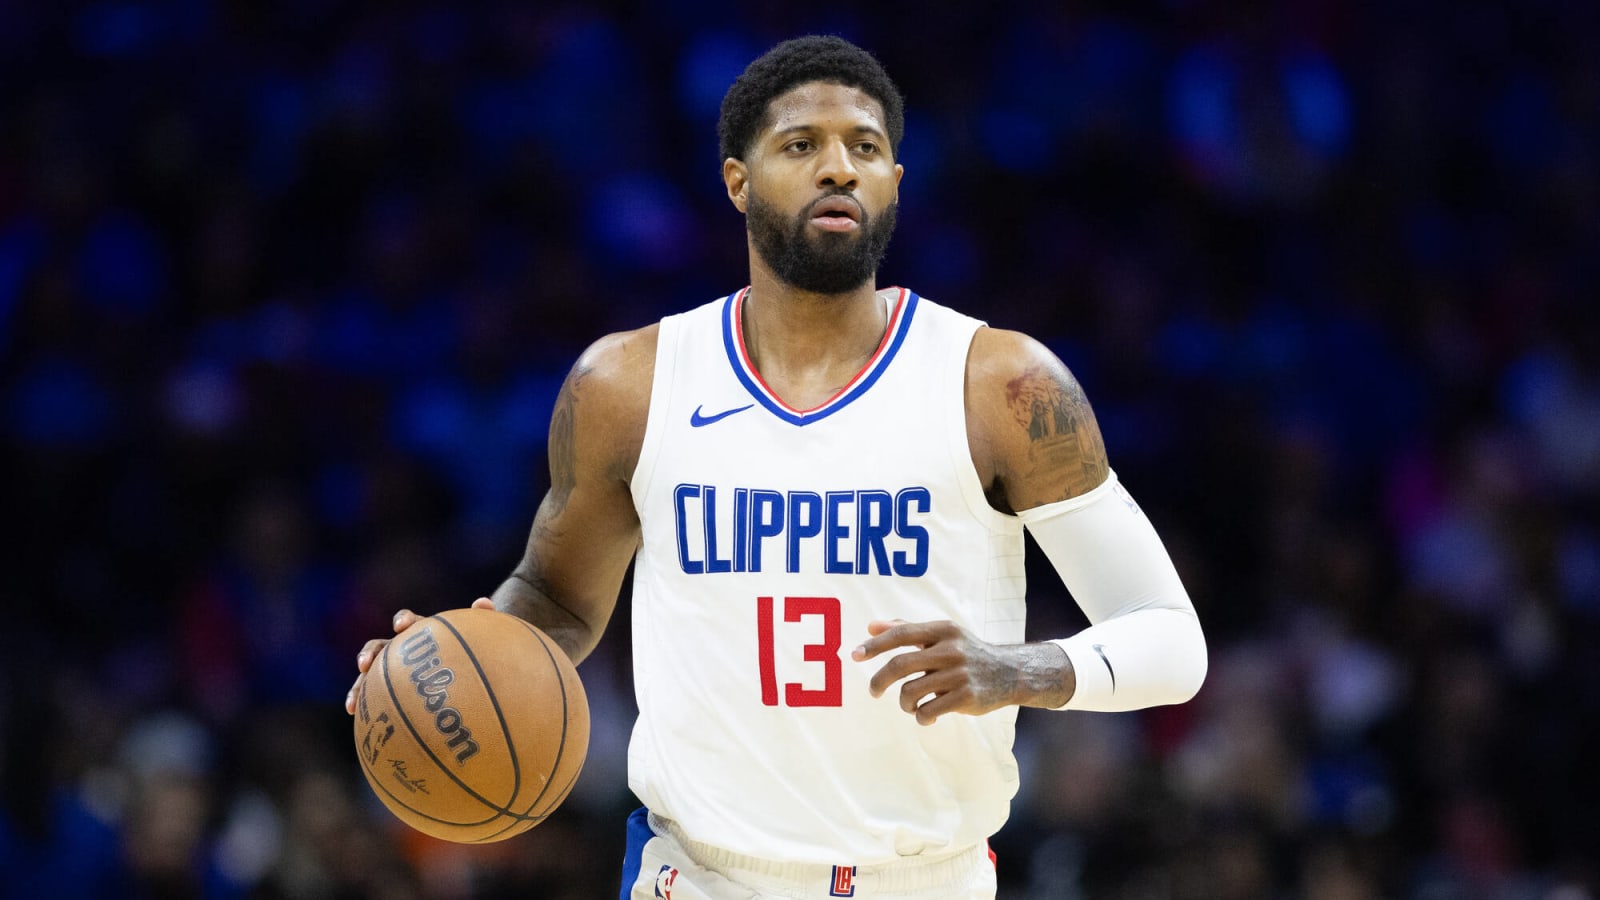 Report: ‘There Are Some Who Expect’ Paul George To Leave Clippers For 76ers This Summer